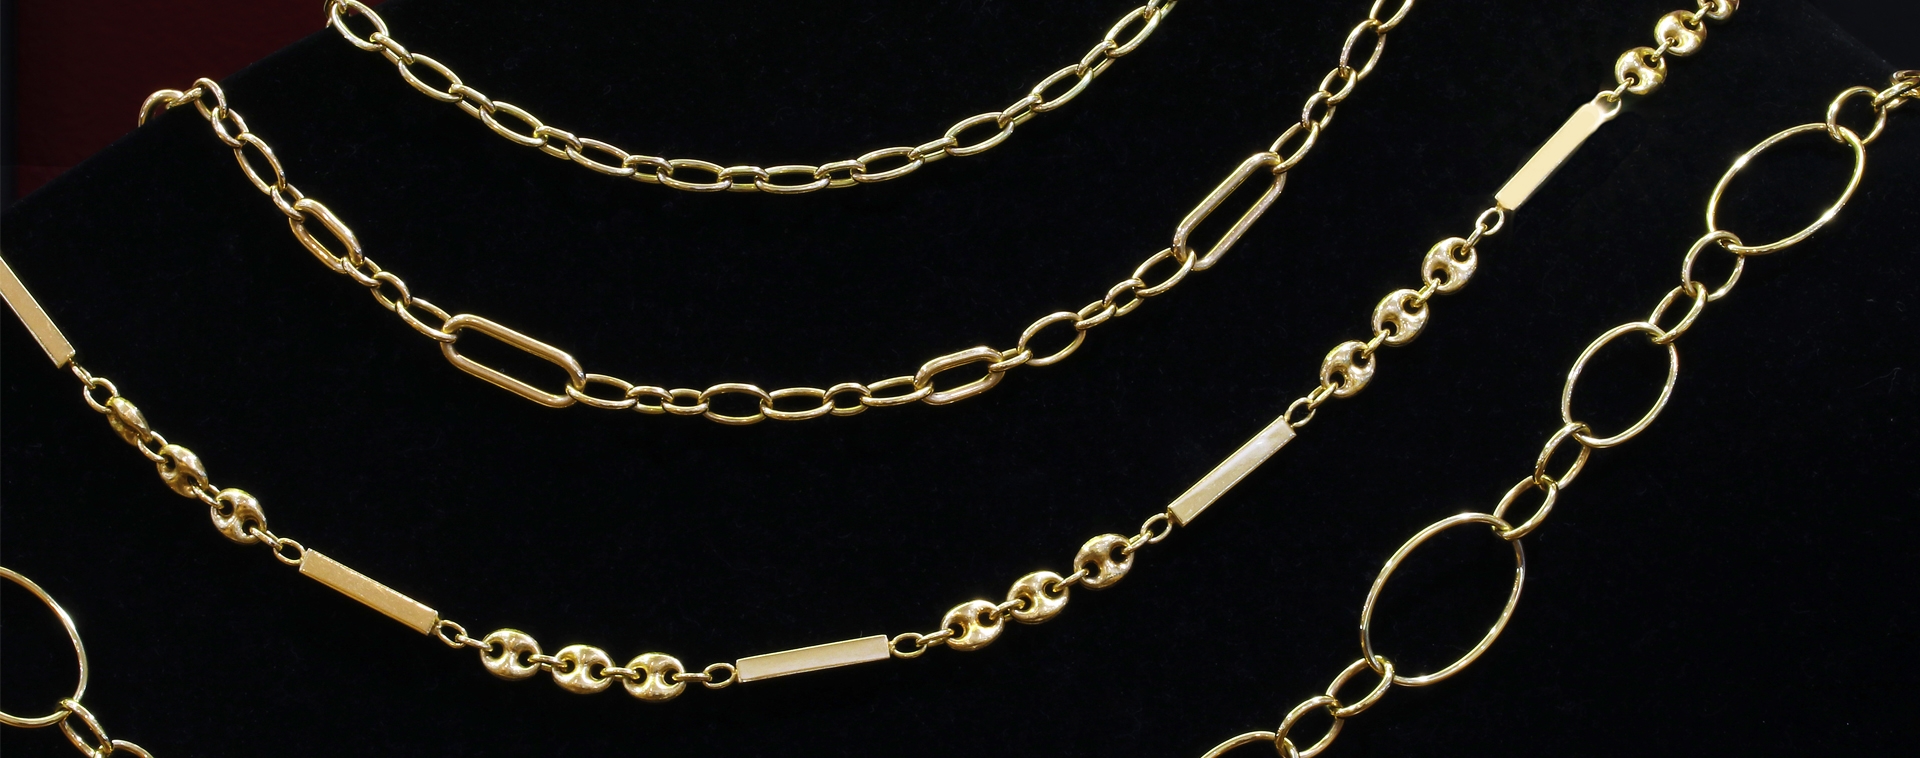 Gold Link Chains